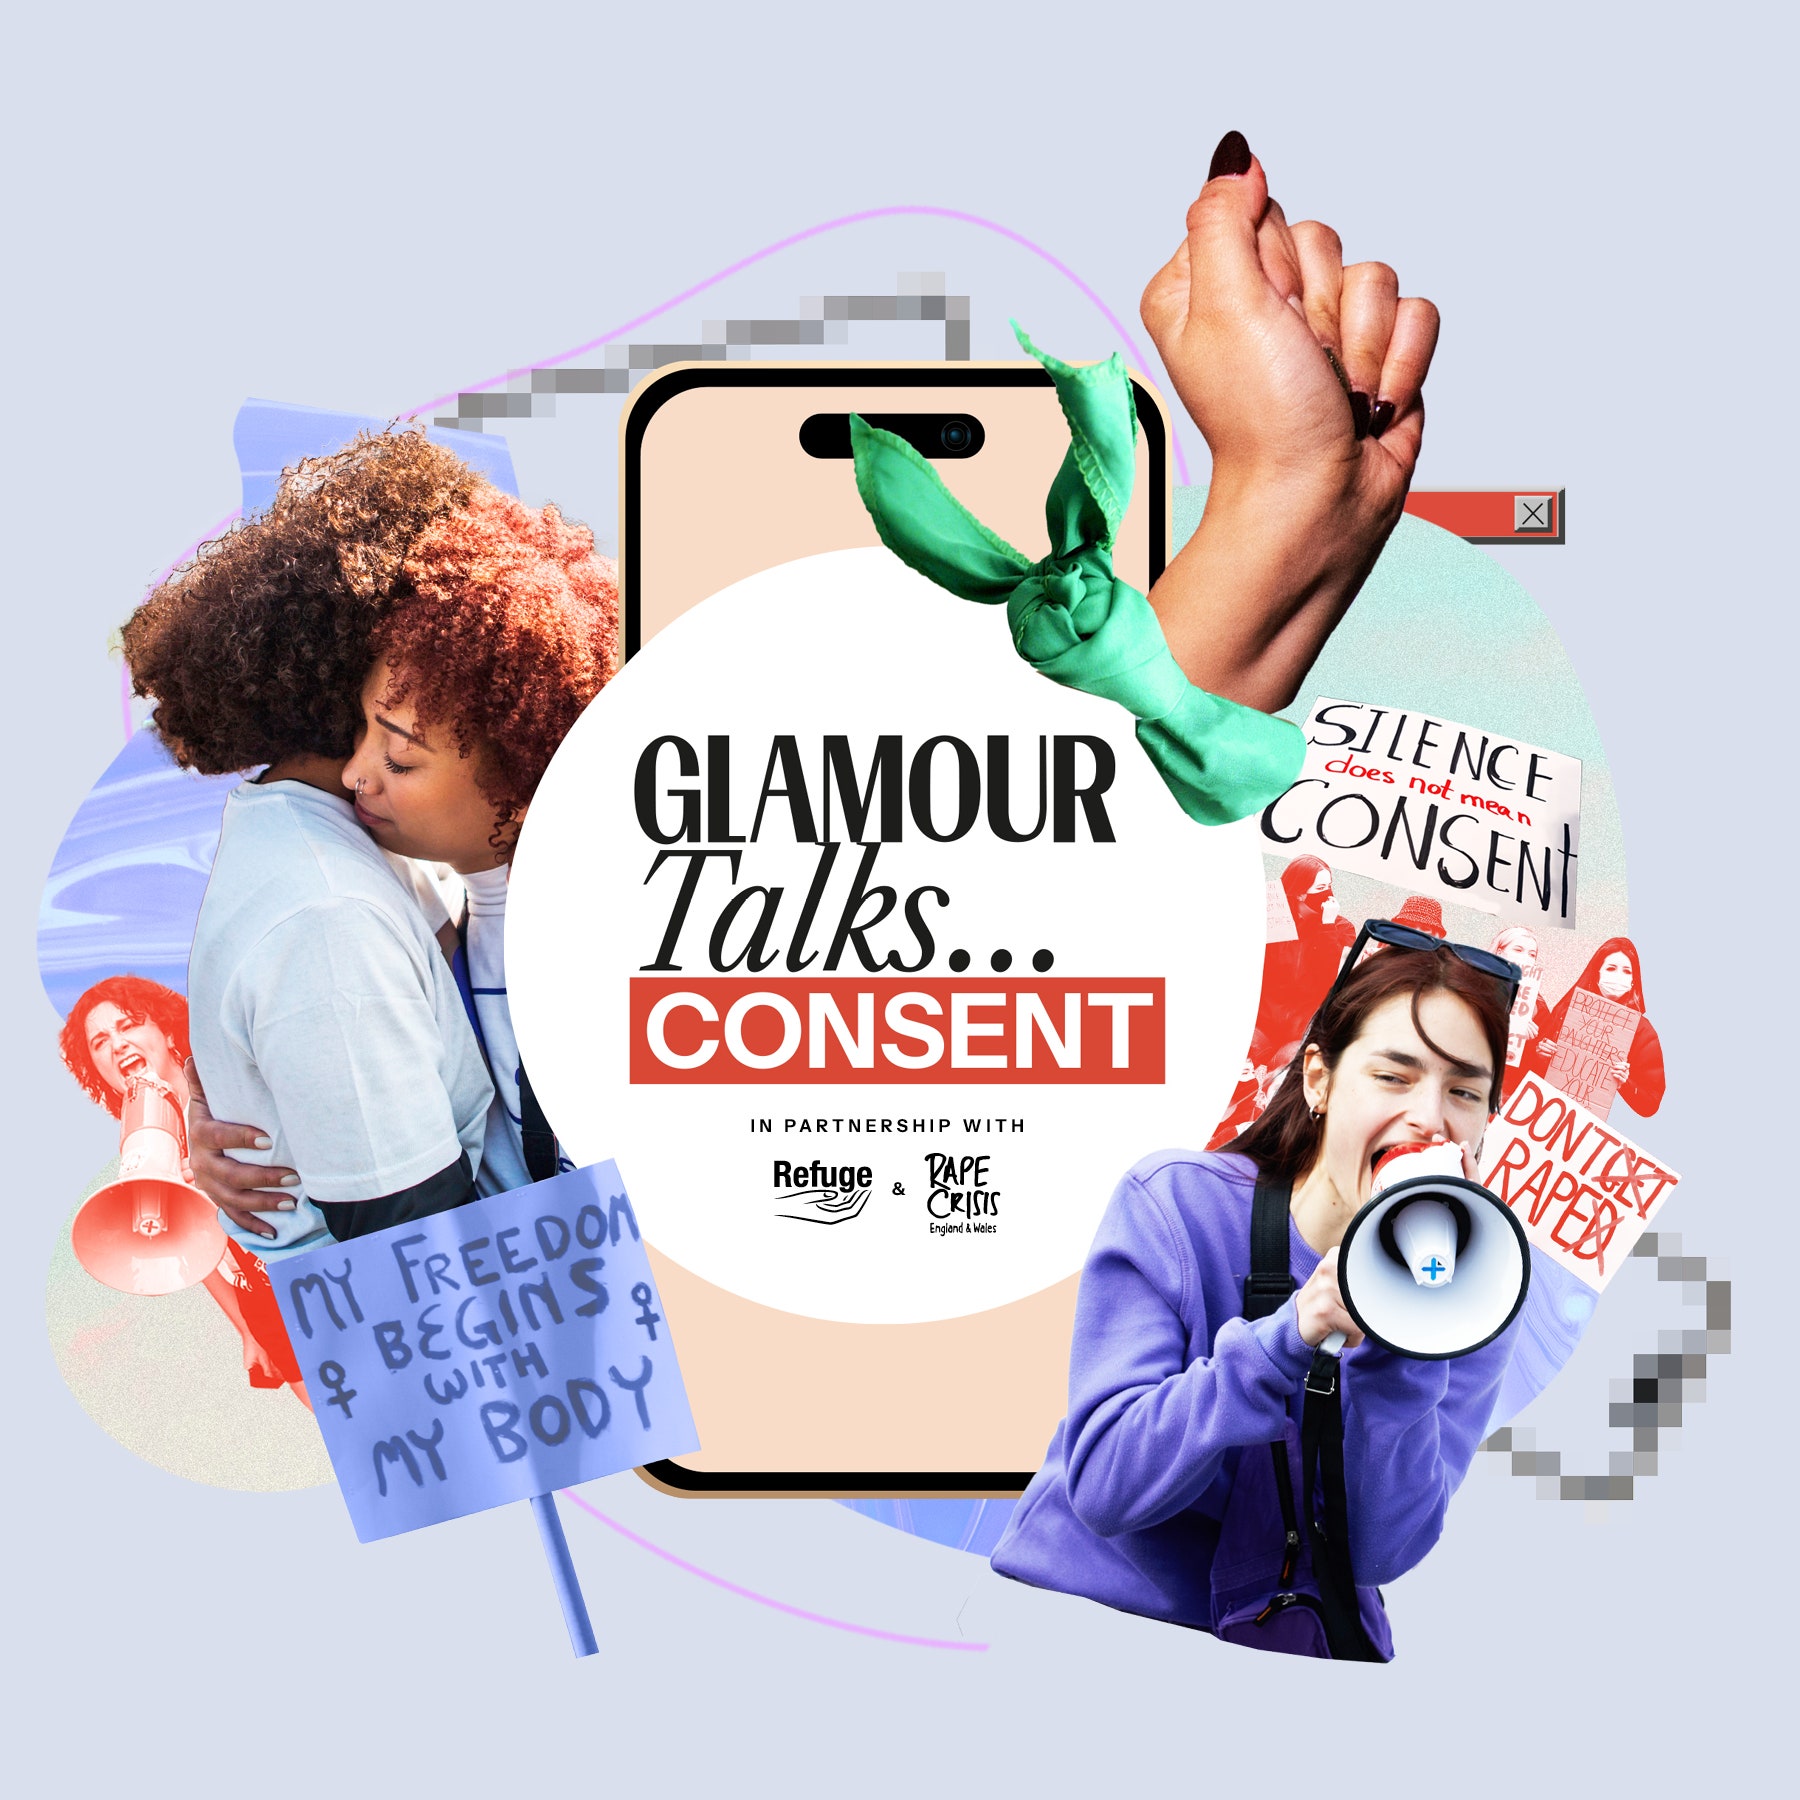 We asked thousands of GLAMOUR readers about sexual consent, from sexual assault to deepfaking. Here's what they said…